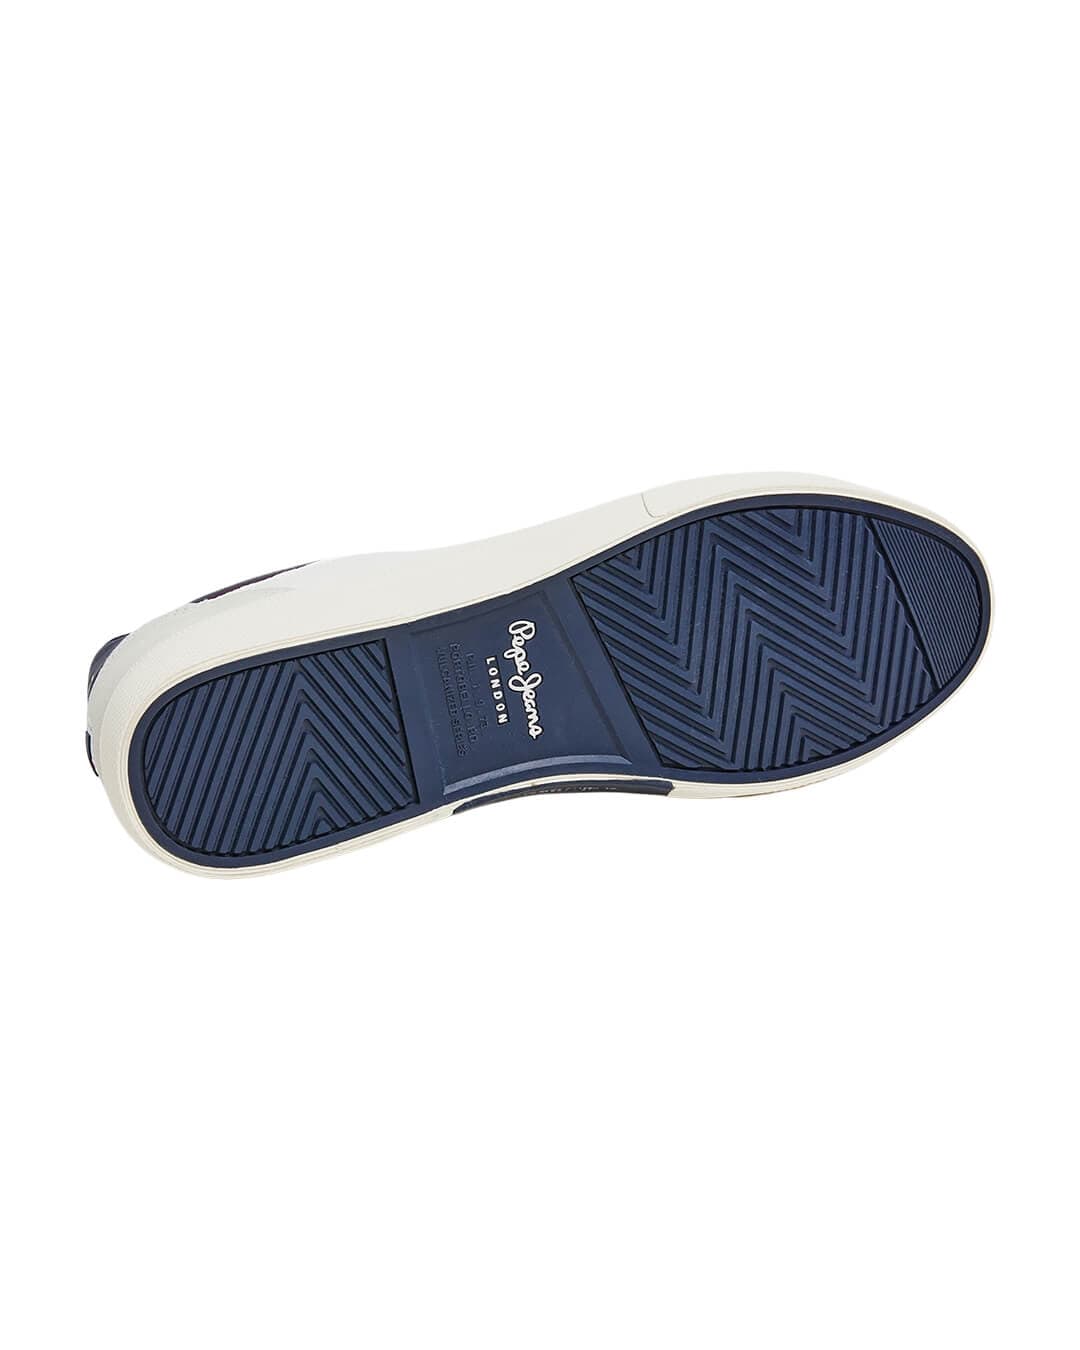 Pepe Jeans Shoes Pepe Jeans Kenton Navy Journey Sneakers